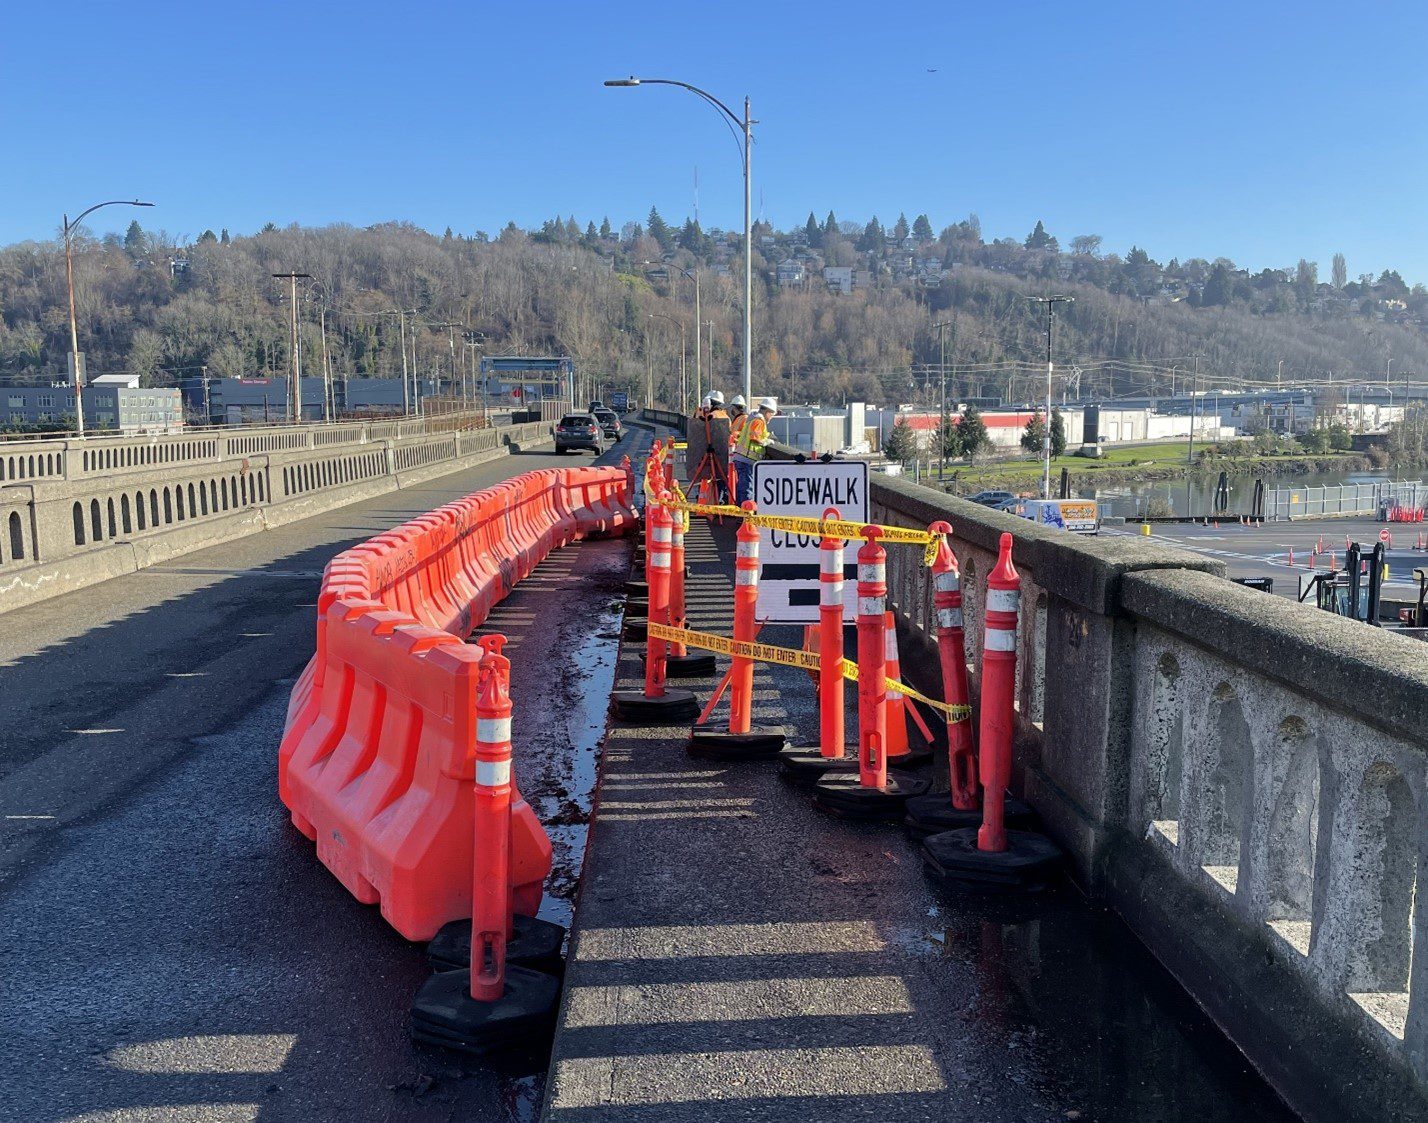 Work crews wearing hard hats and high visibility vests work atop a large bridge. Orange cones and barrels show where a sidewalk is closed and a temporary pathway has been created.